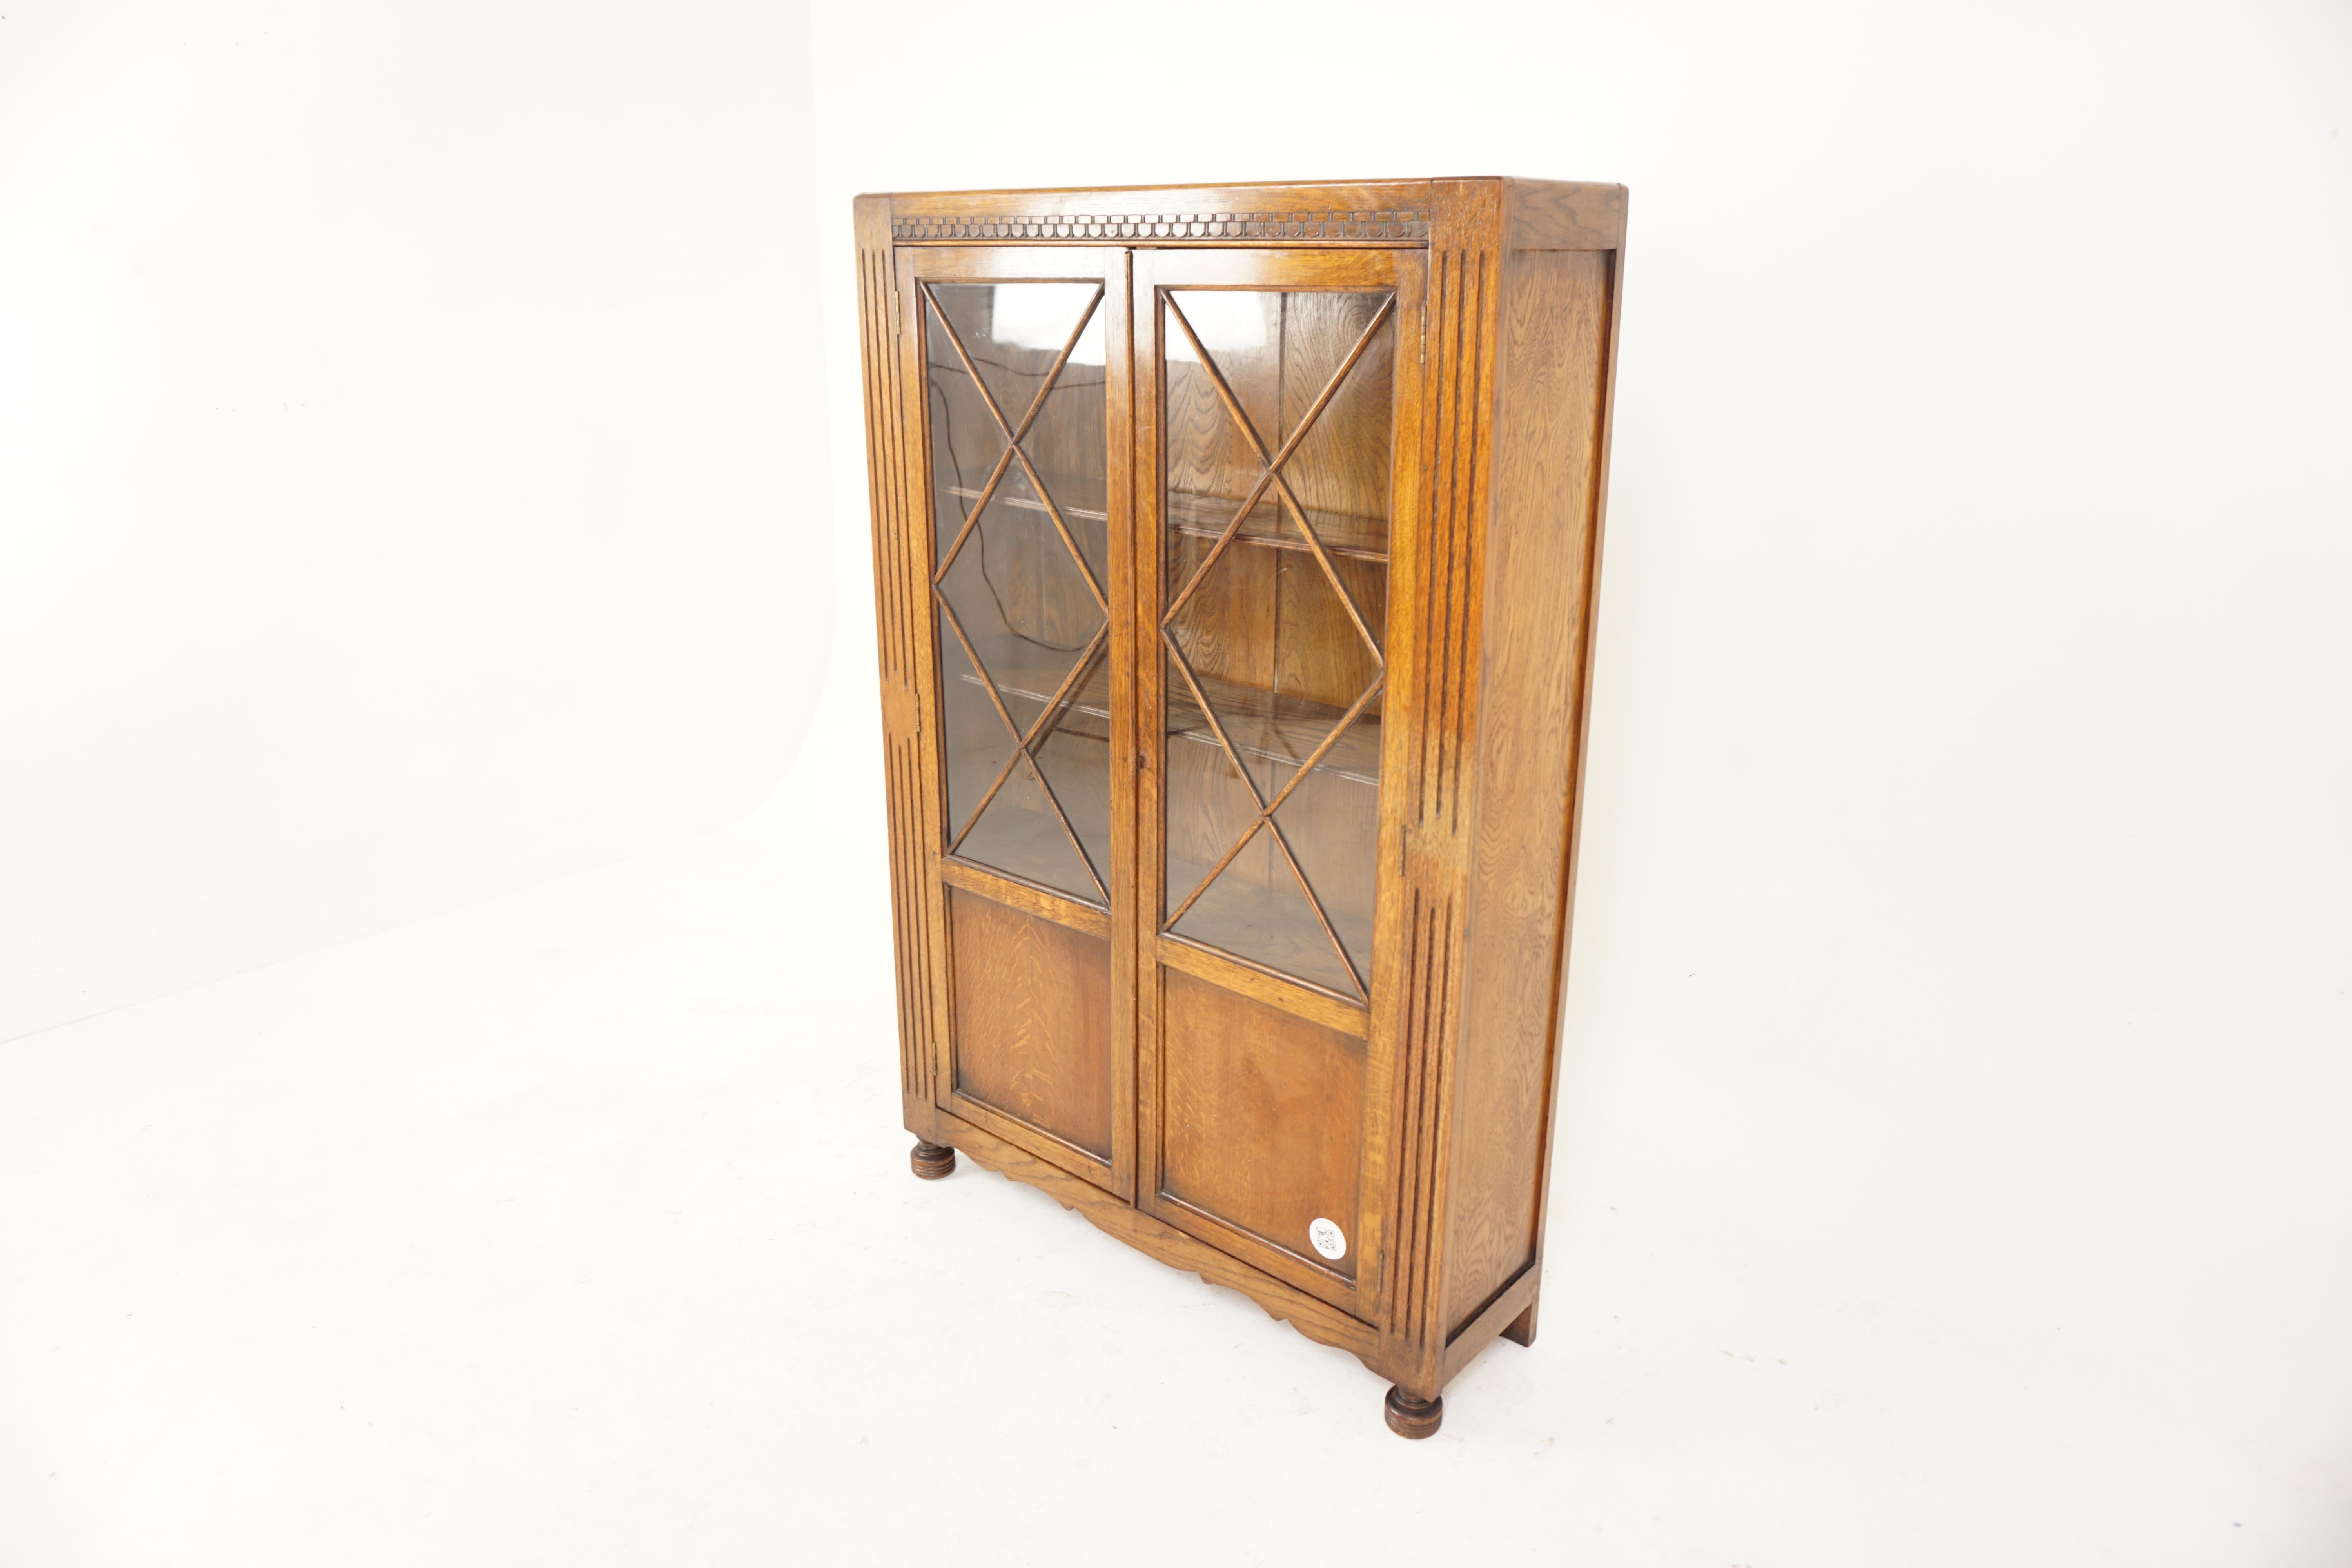 Vintage Art Deco oak 2 door bookcase, display cabinet, Scotland 1930, H733

Scotland 1930
Solid Oak + veneers
Original Finish
Rectangular moulded top
Carved frieze underneath
Pair of original glass with triangle moulding to the front
Opens to reveal